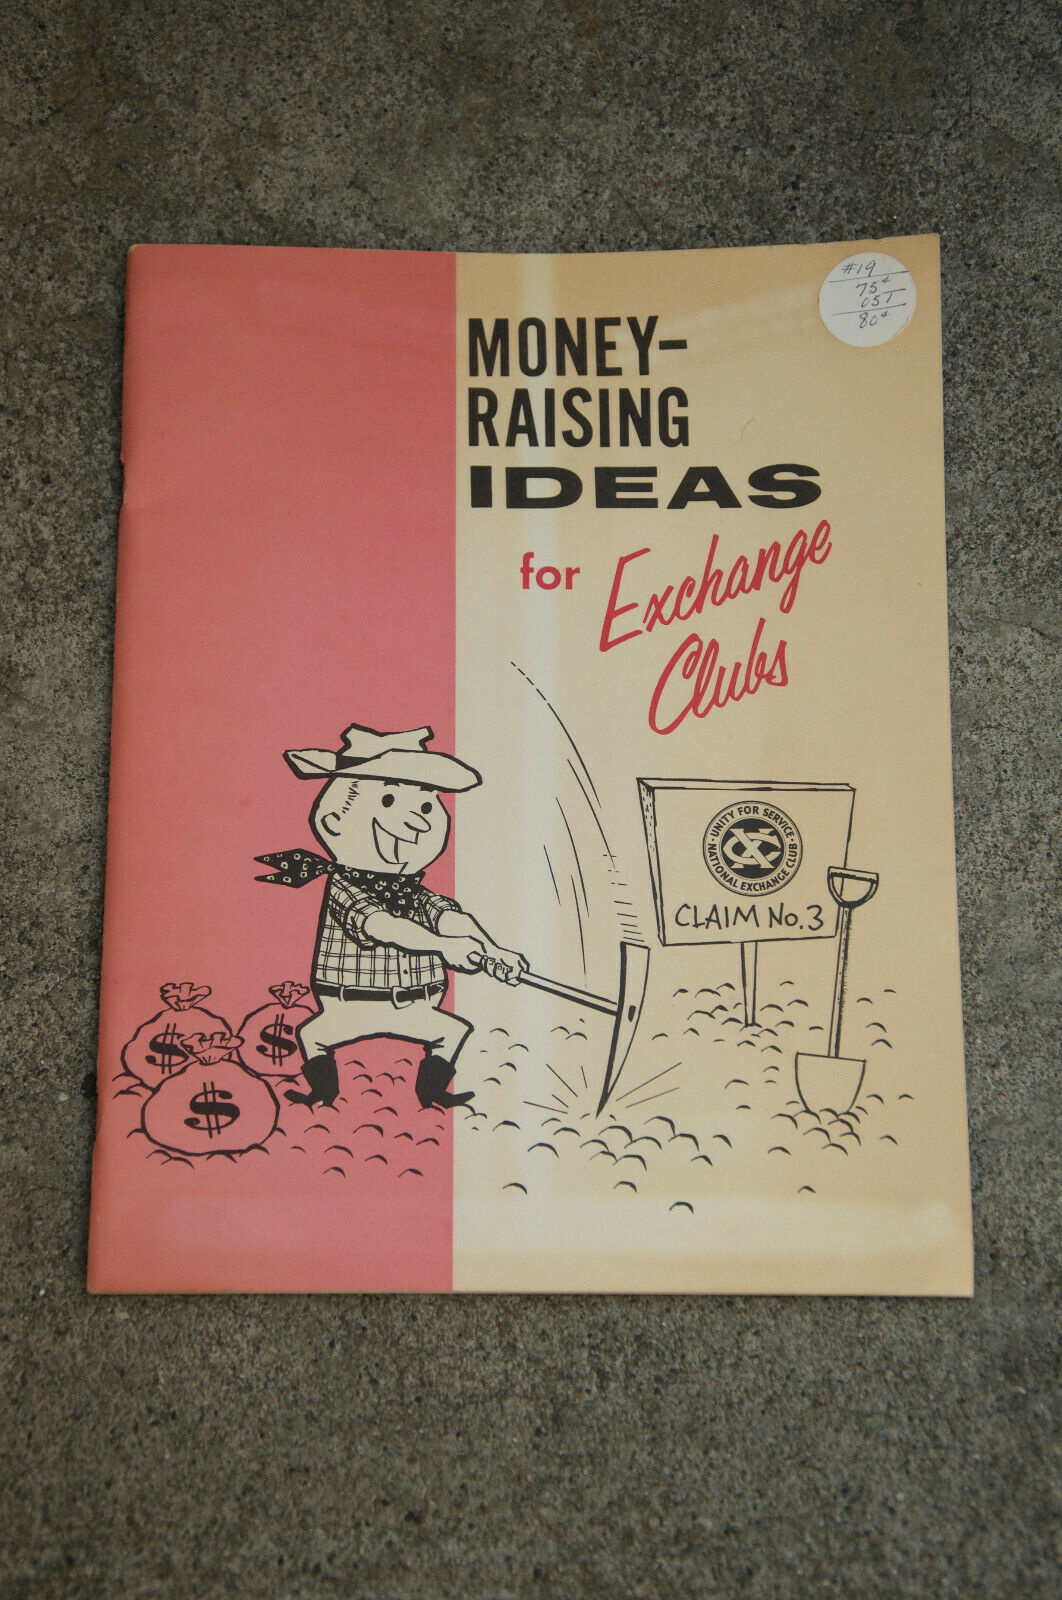 Money Raising Ideas For Exchange Clubs Claim No.3 Booklet Used